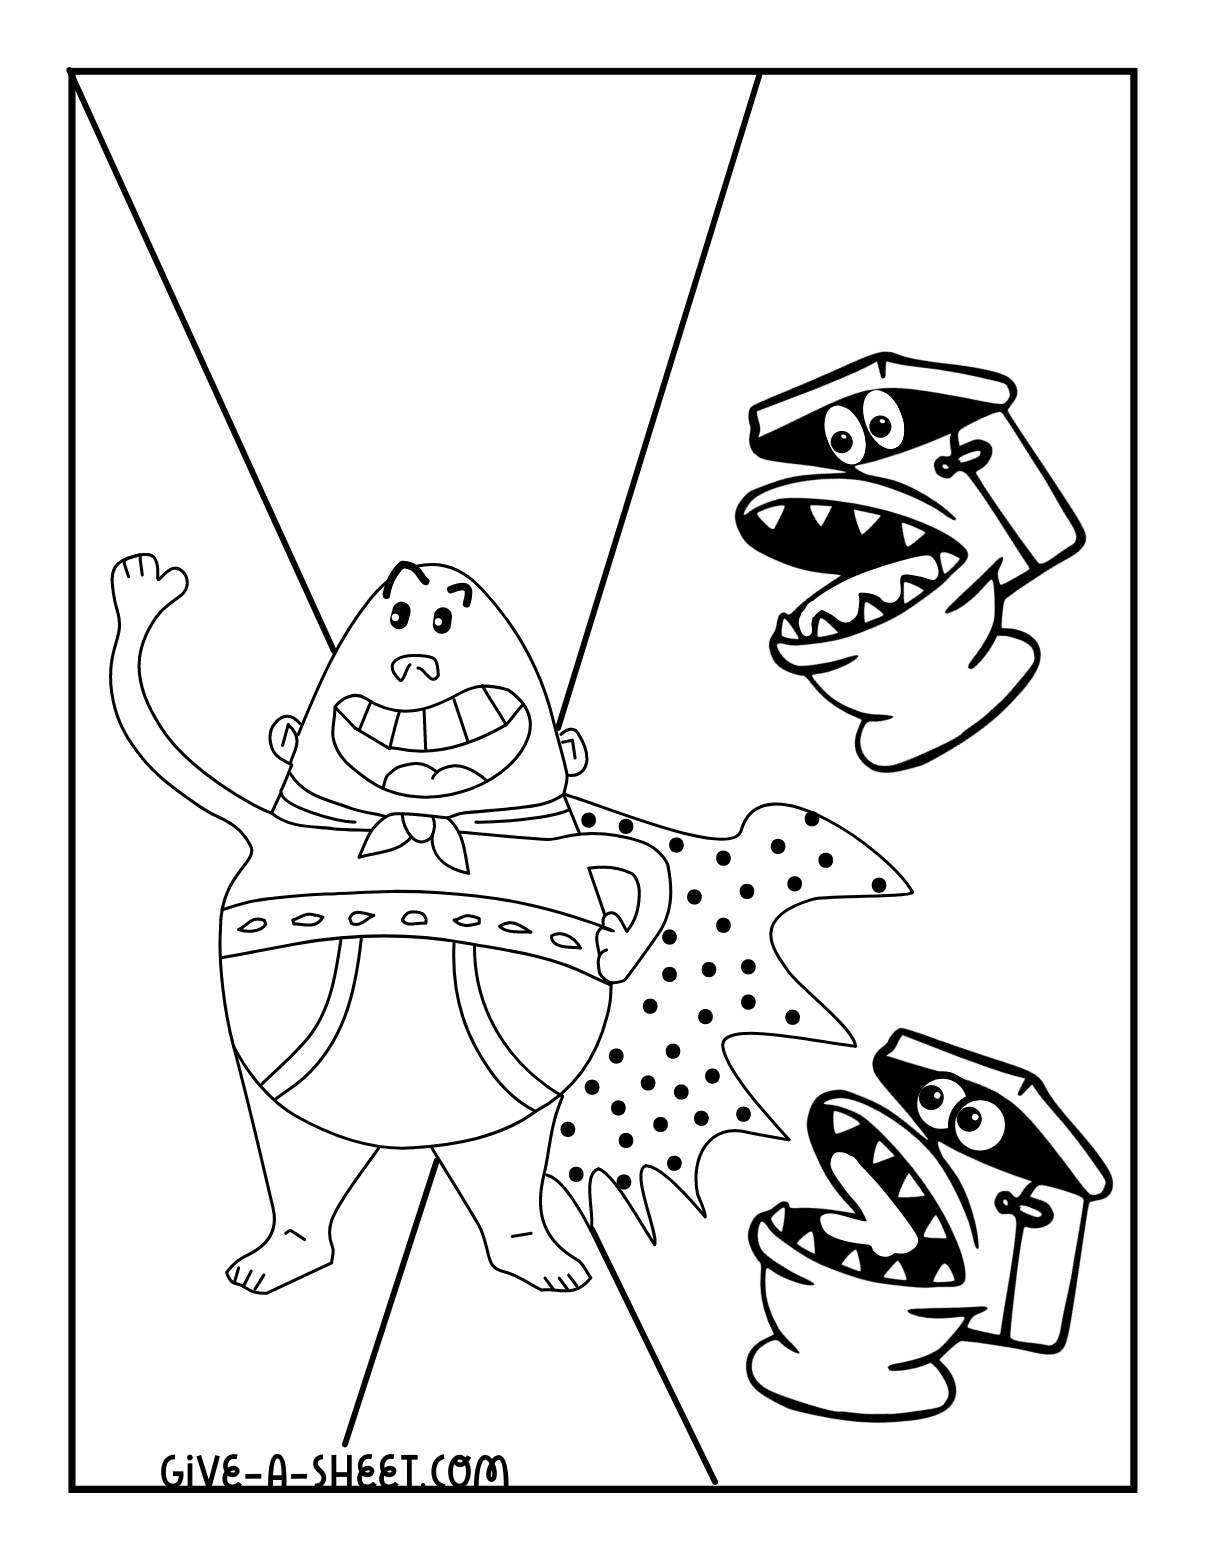 Captain underpants and toilet monster coloring pages.